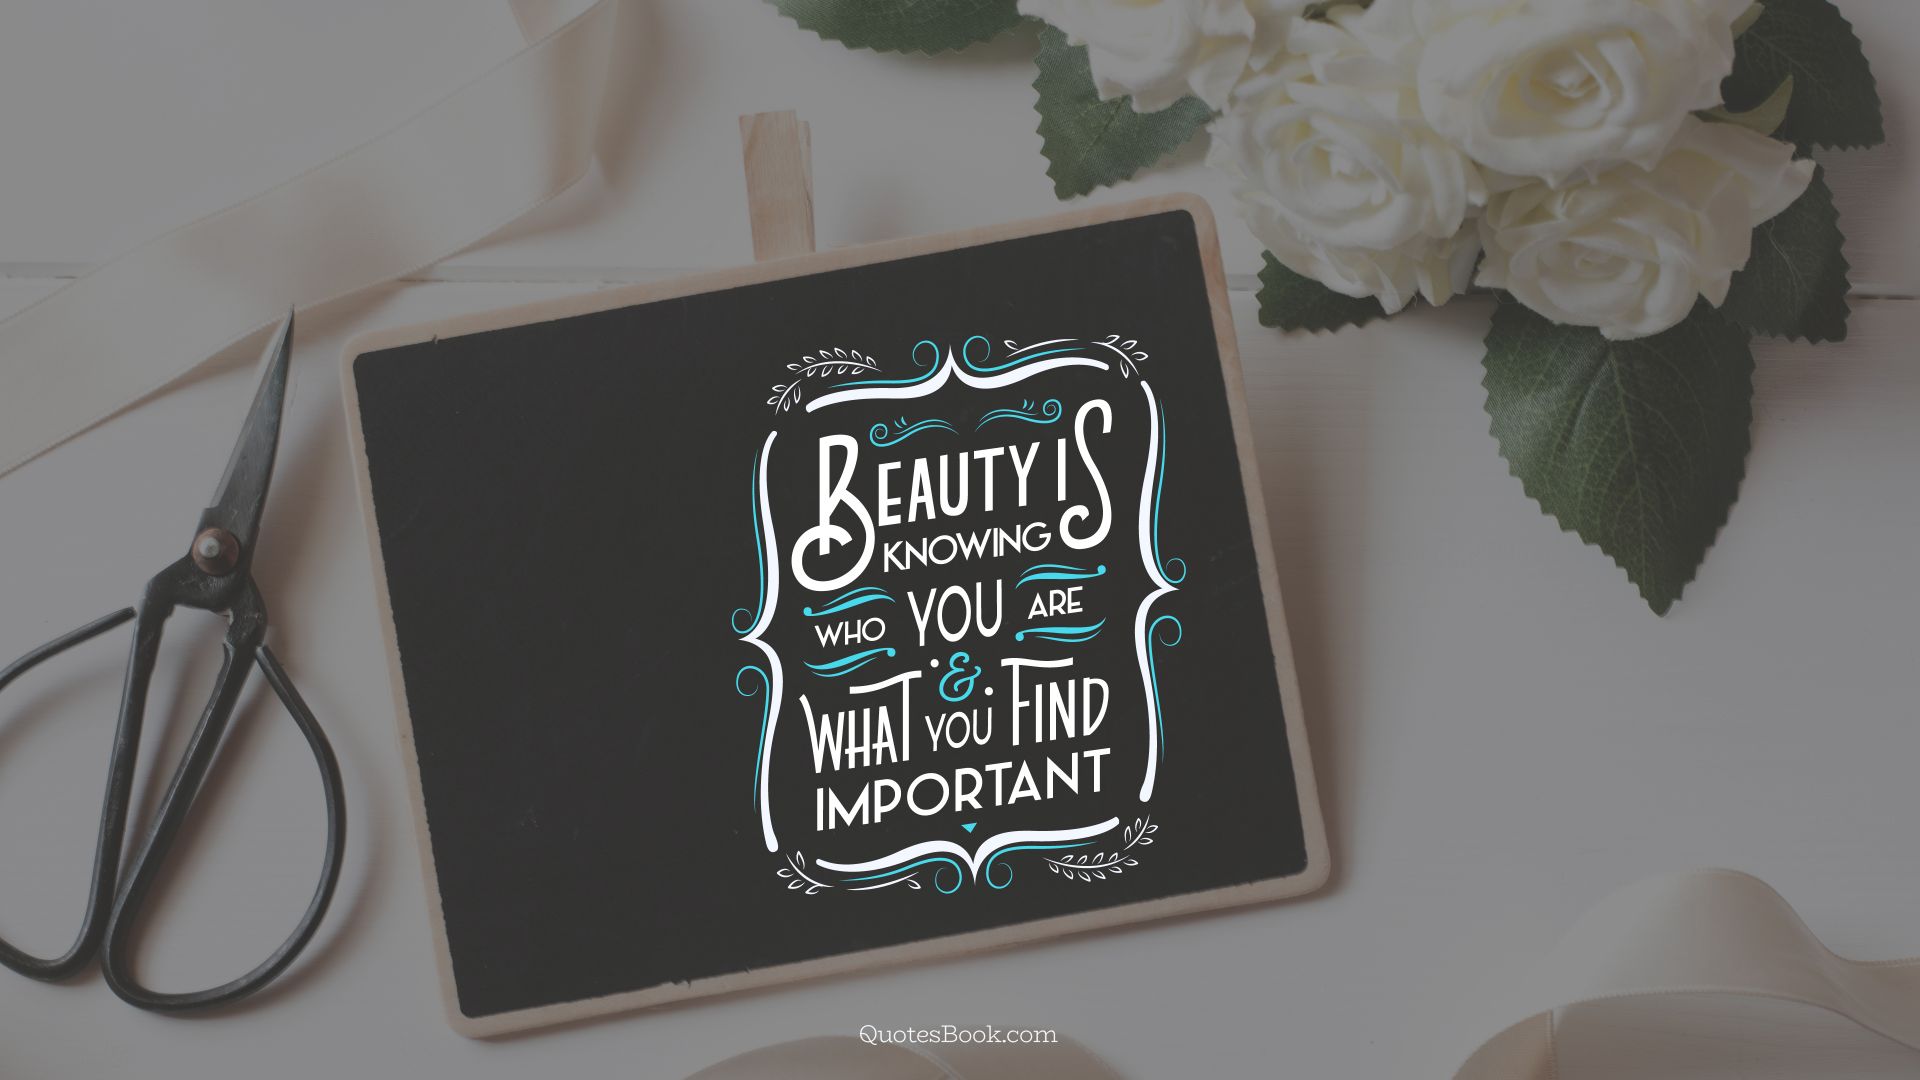 Beauty is knowing who you are and what you find important